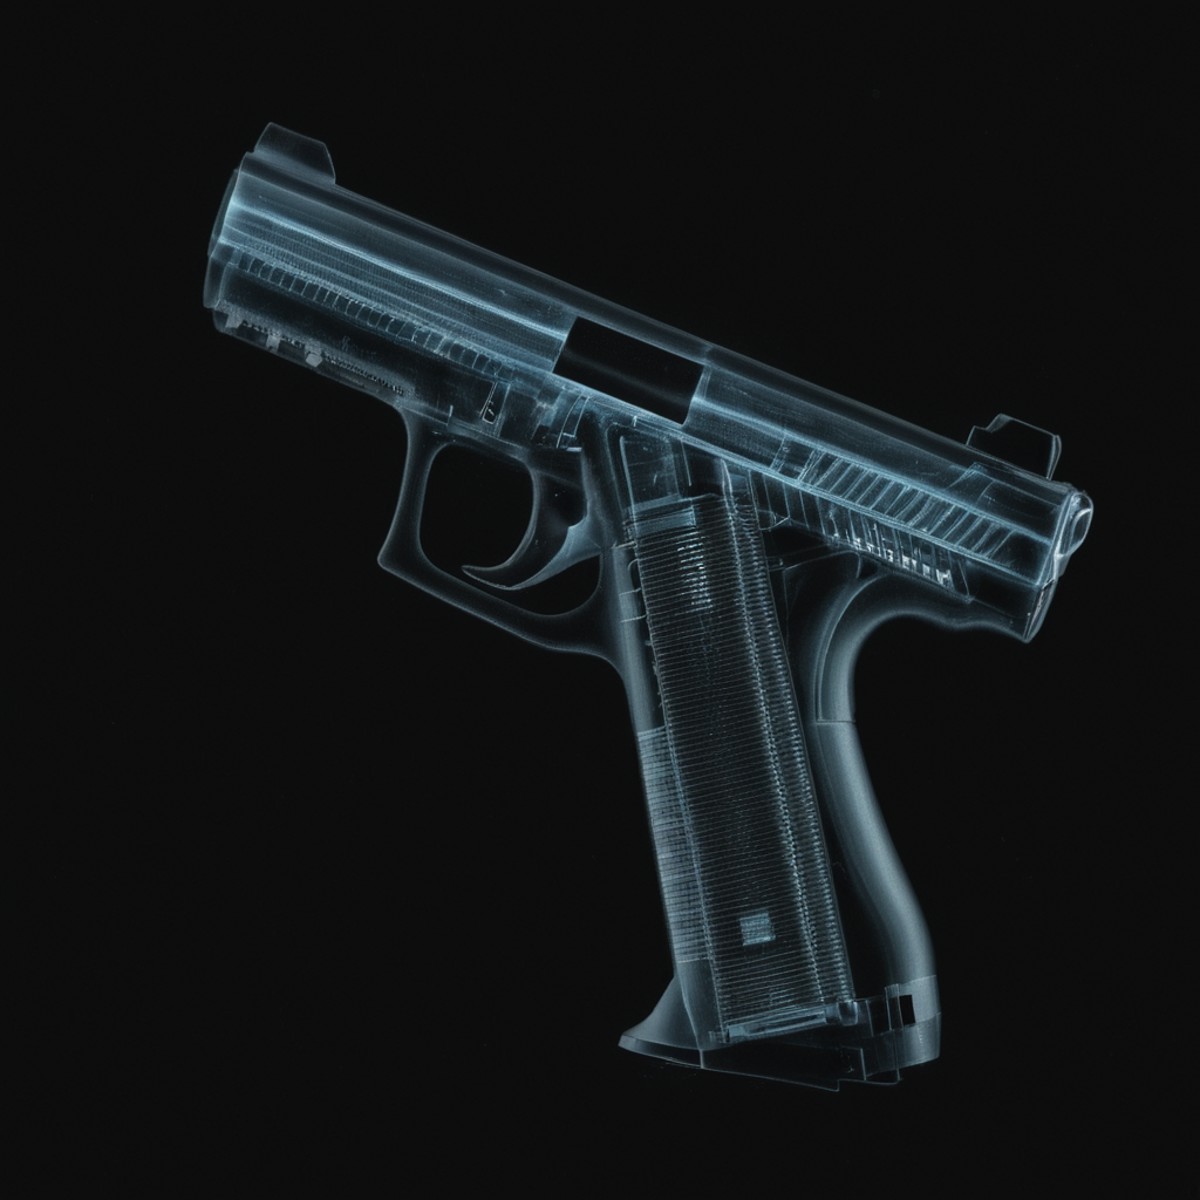 cinematic film still of  <lora:x-ray style:1> X-ray of
a gun with a black background
,x-ray style, shallow depth of field,...